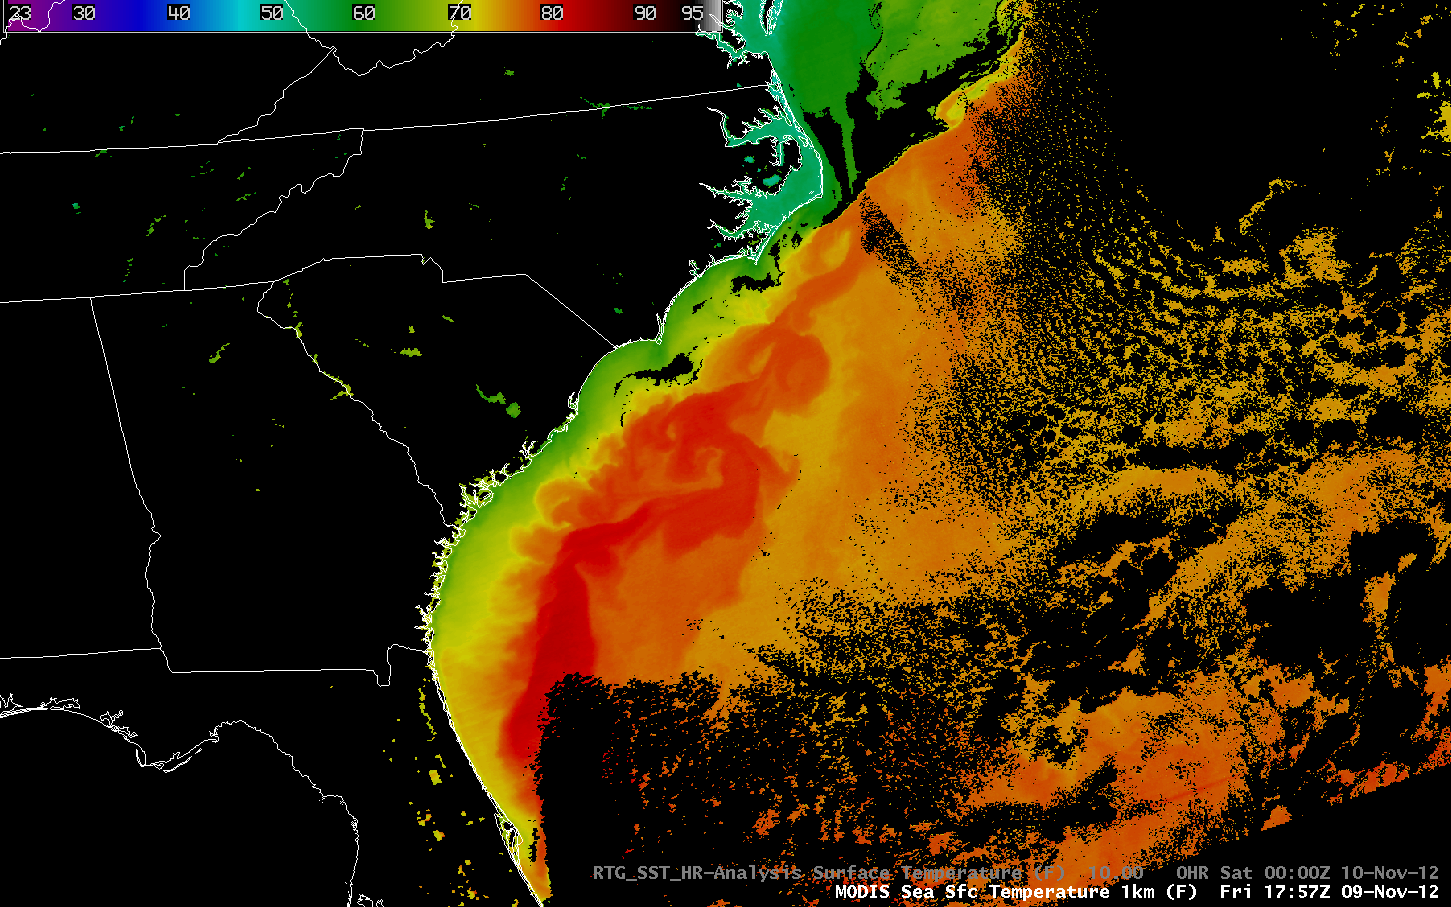 MODIS Sea Surface Temperature (SST) product with overlay of RTG_SST High-Resolution model SST field